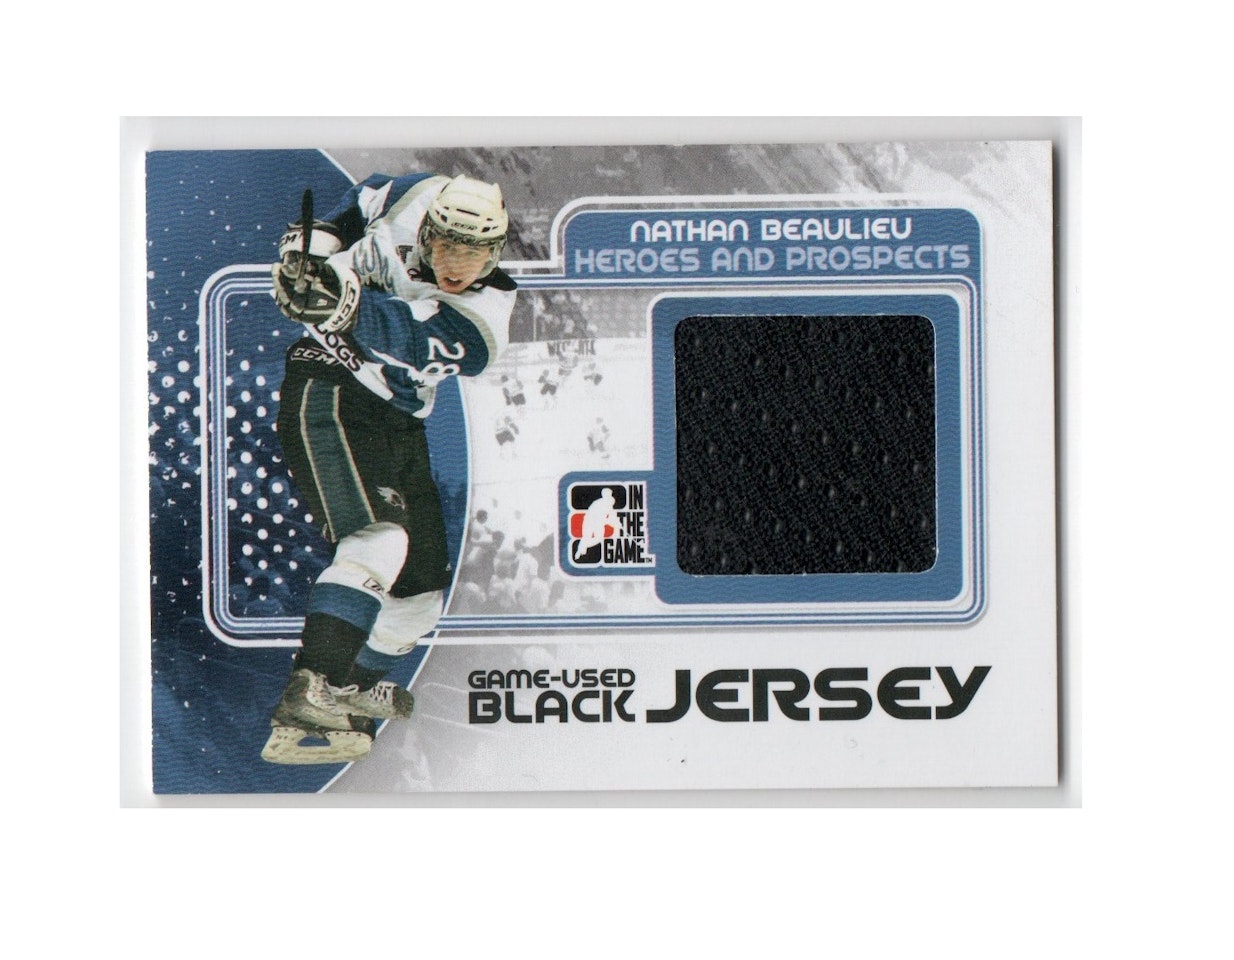 2010-11 ITG Heroes and Prospects Game Used Jerseys Black #M32 Nathan Beaulieu (40-X157-OTHERS)